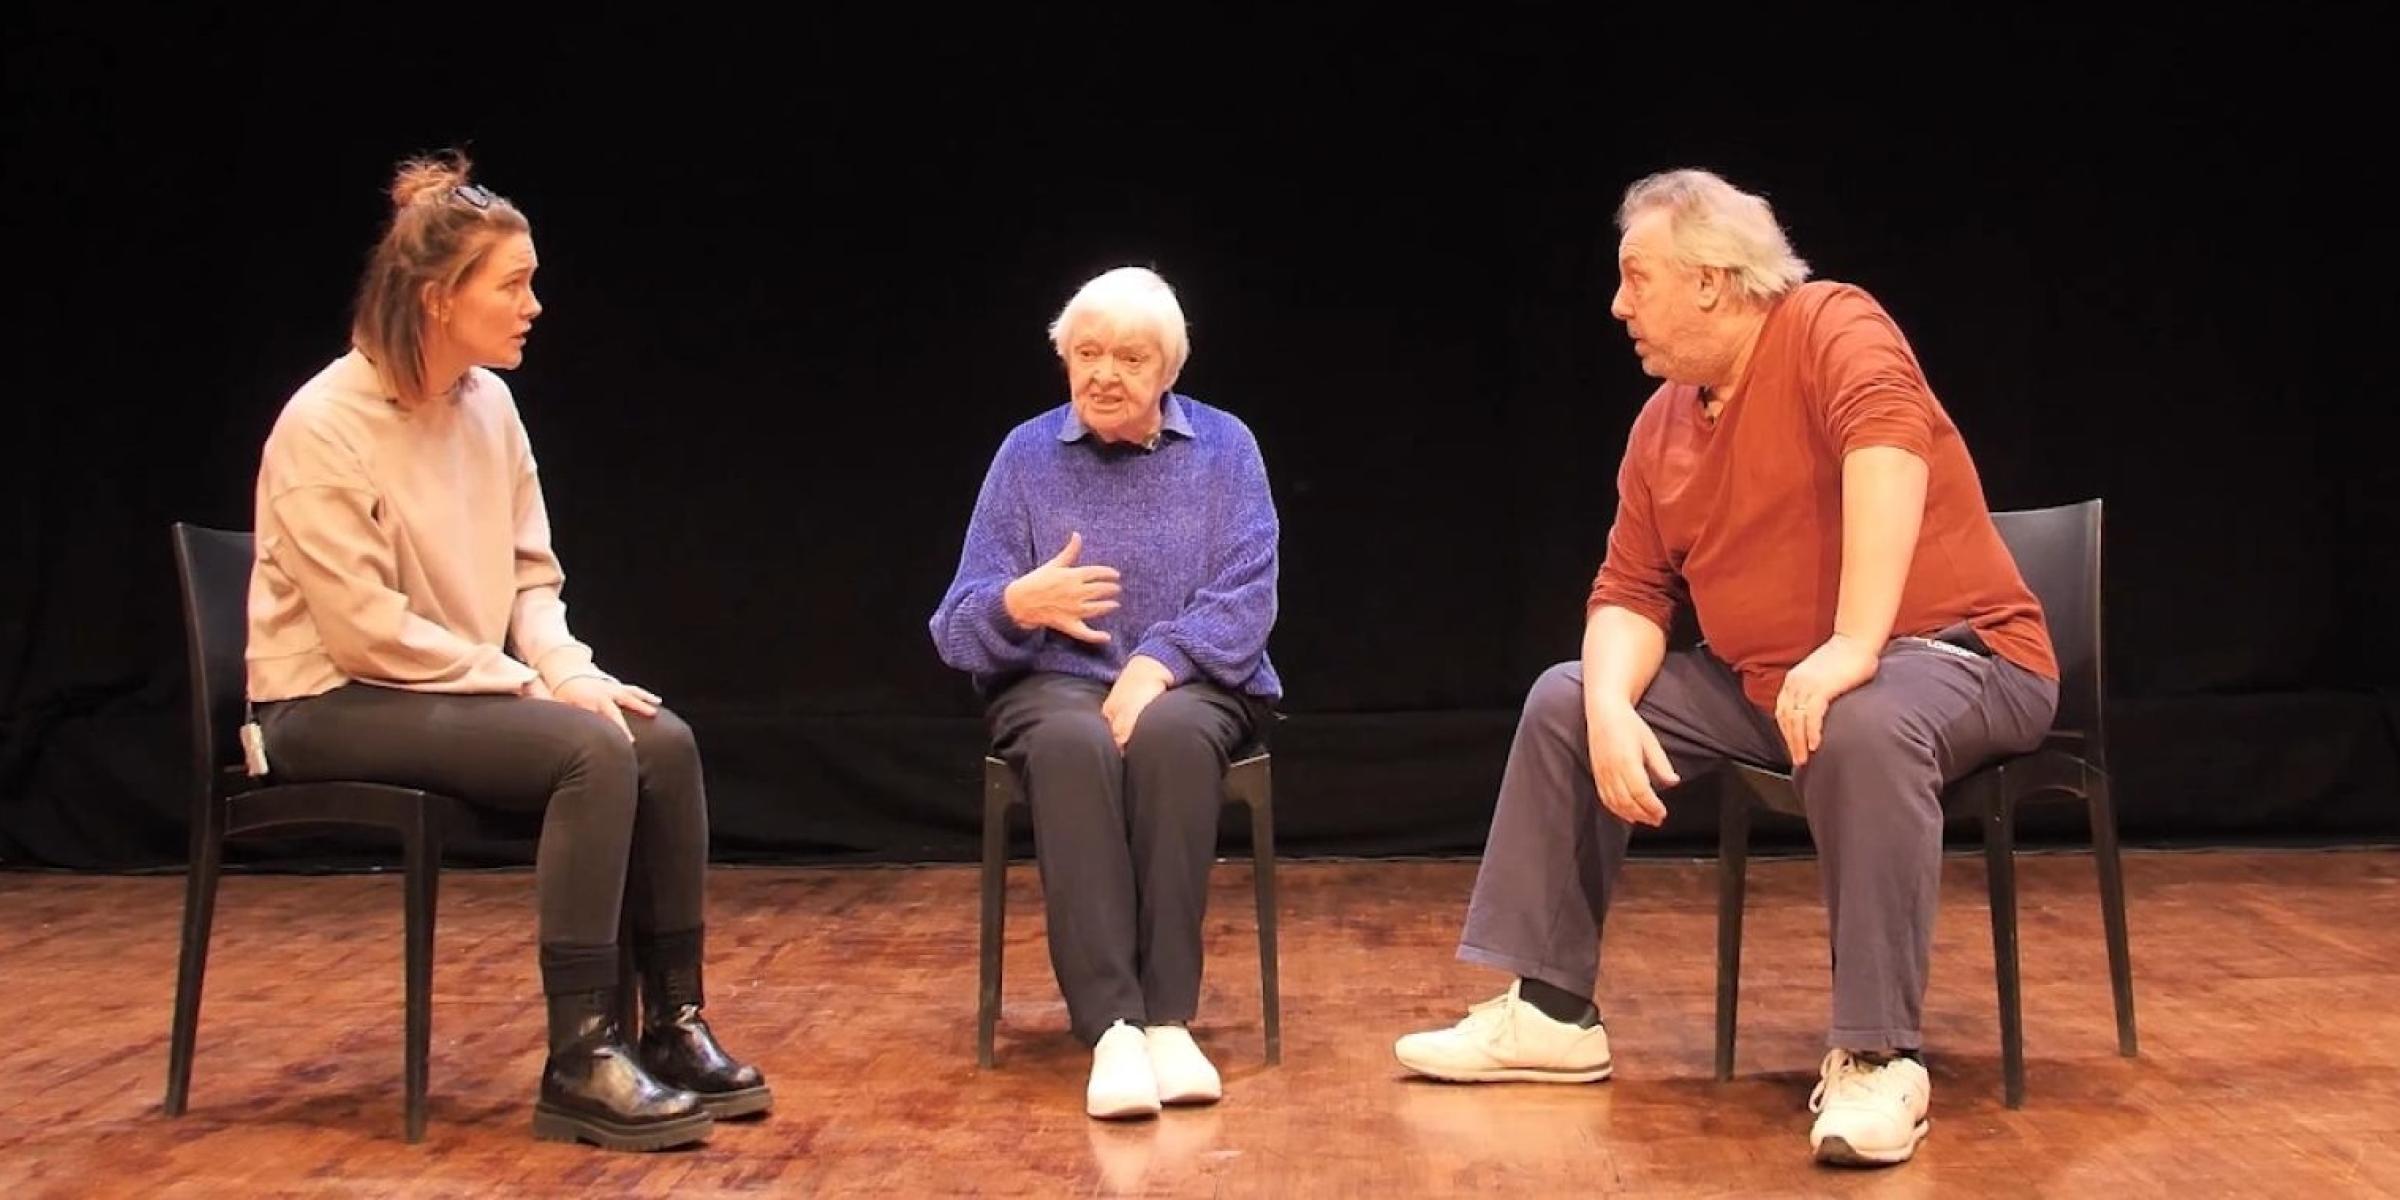 3 people onstage in a play